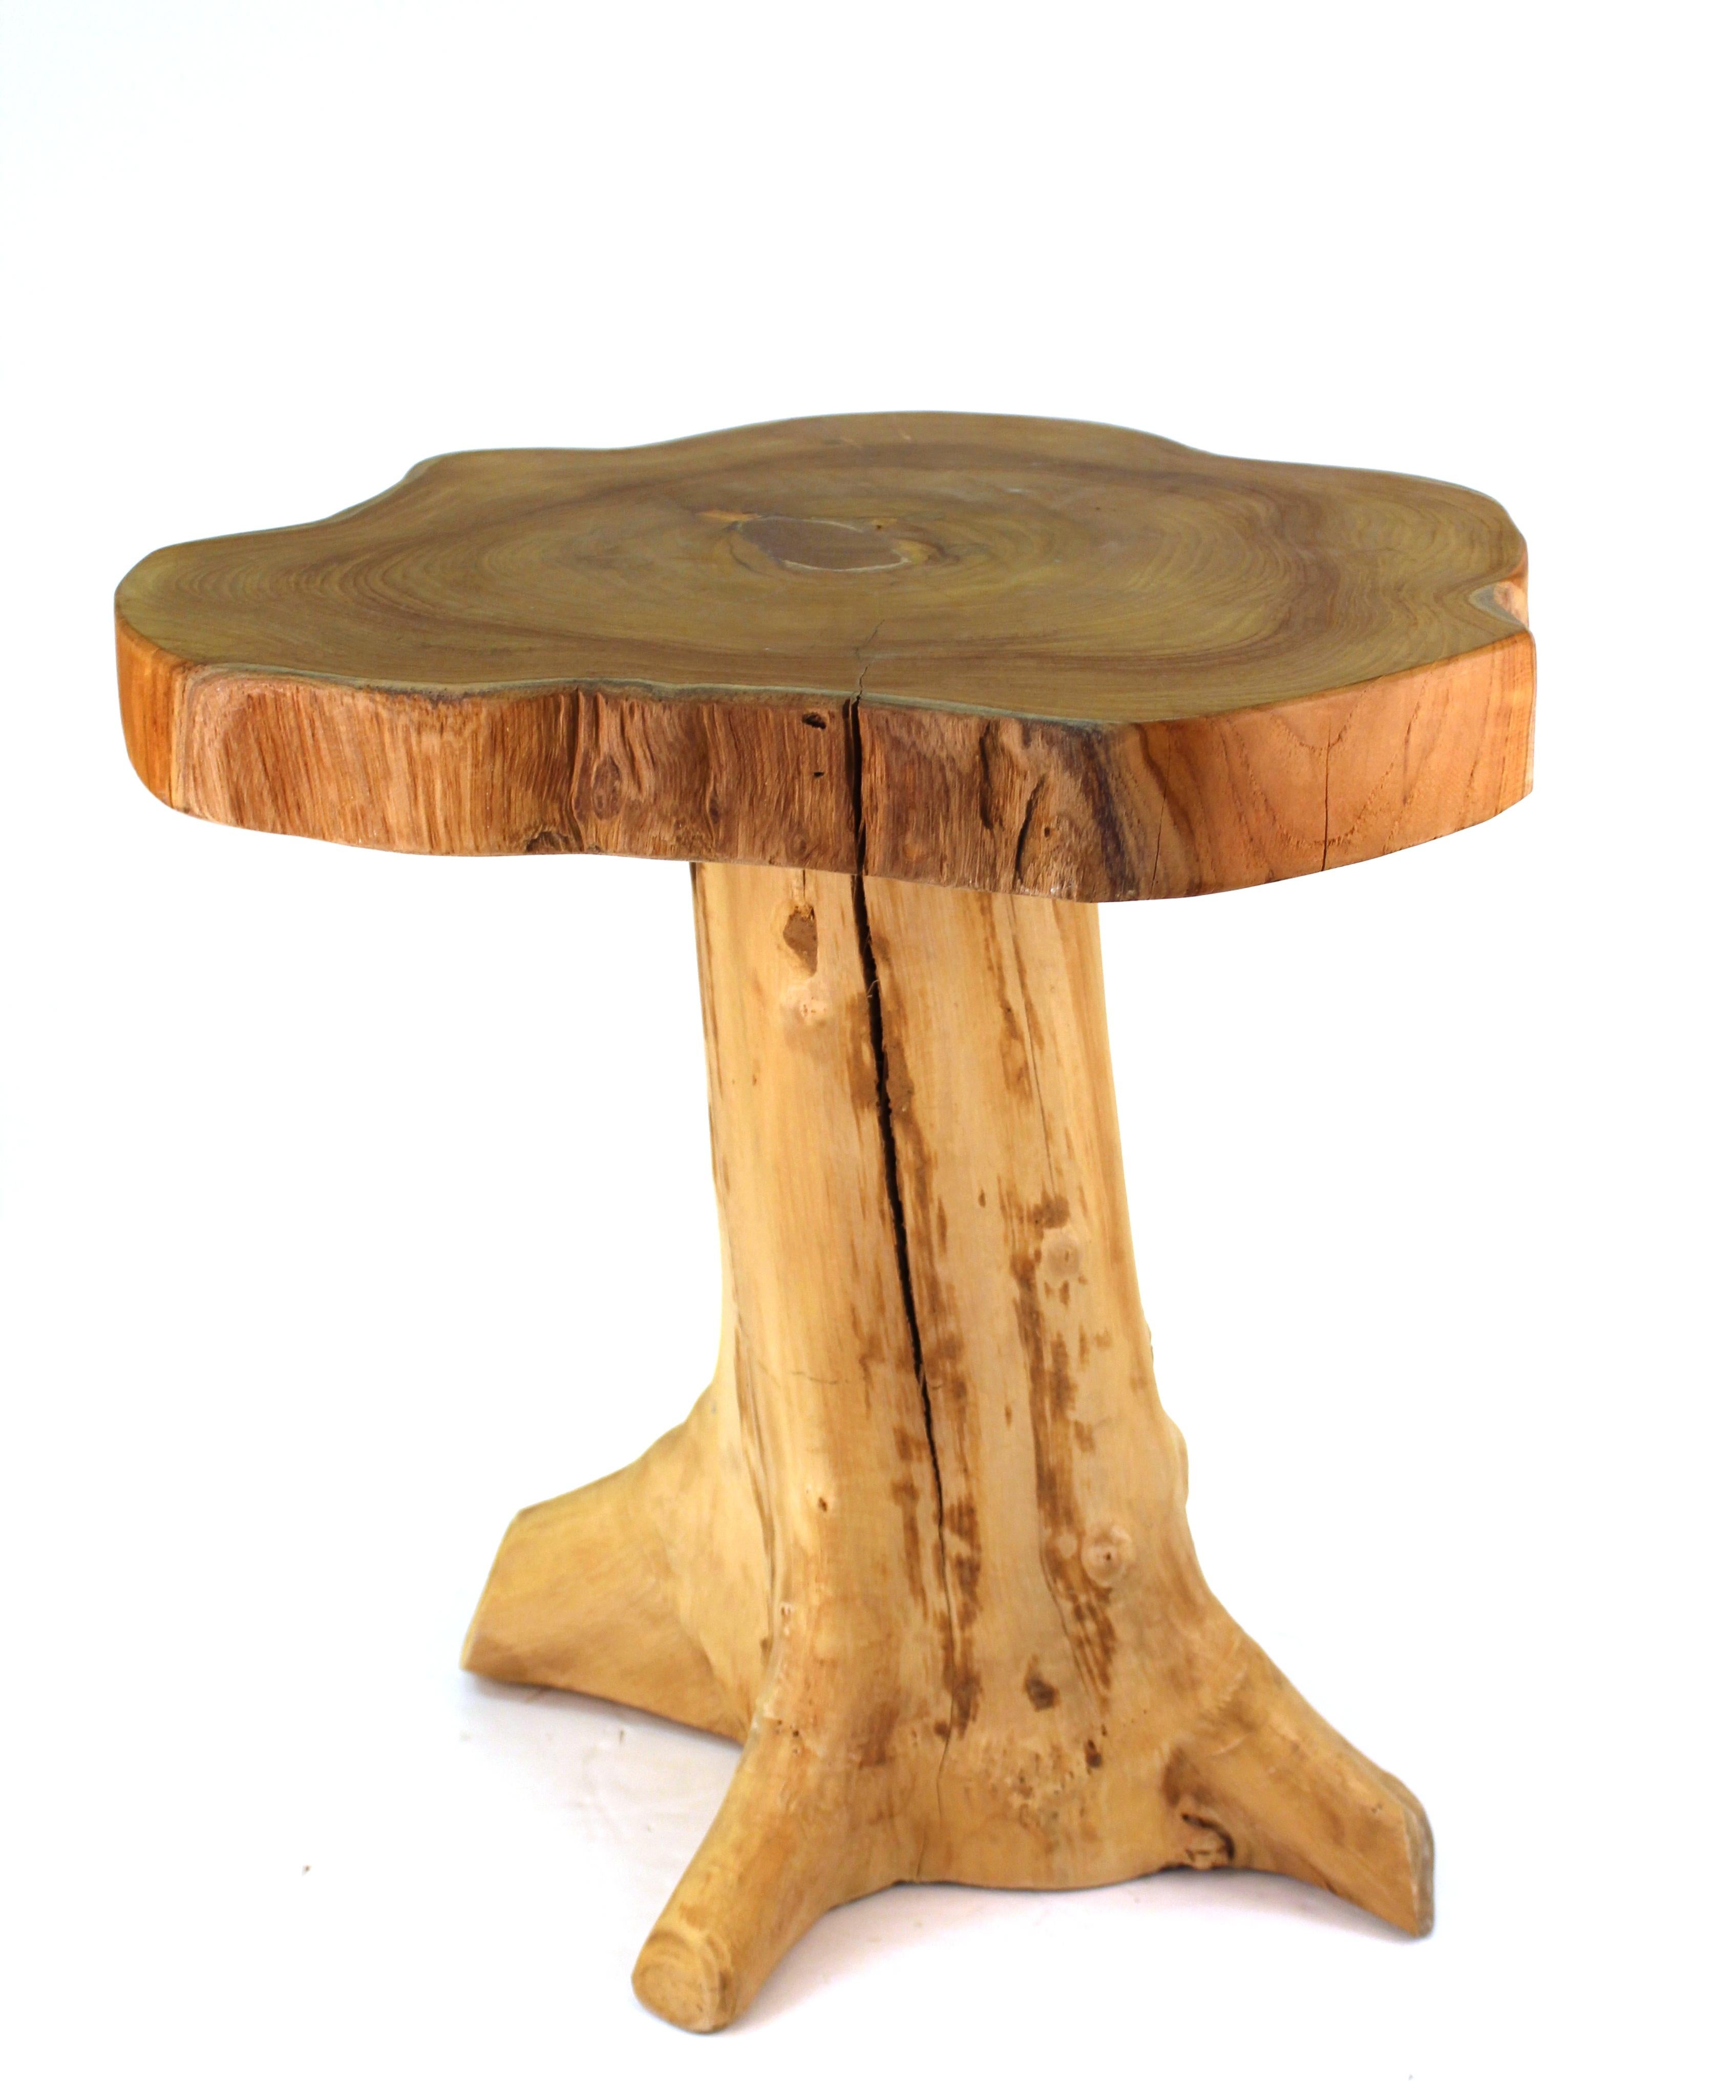 tree trunk table